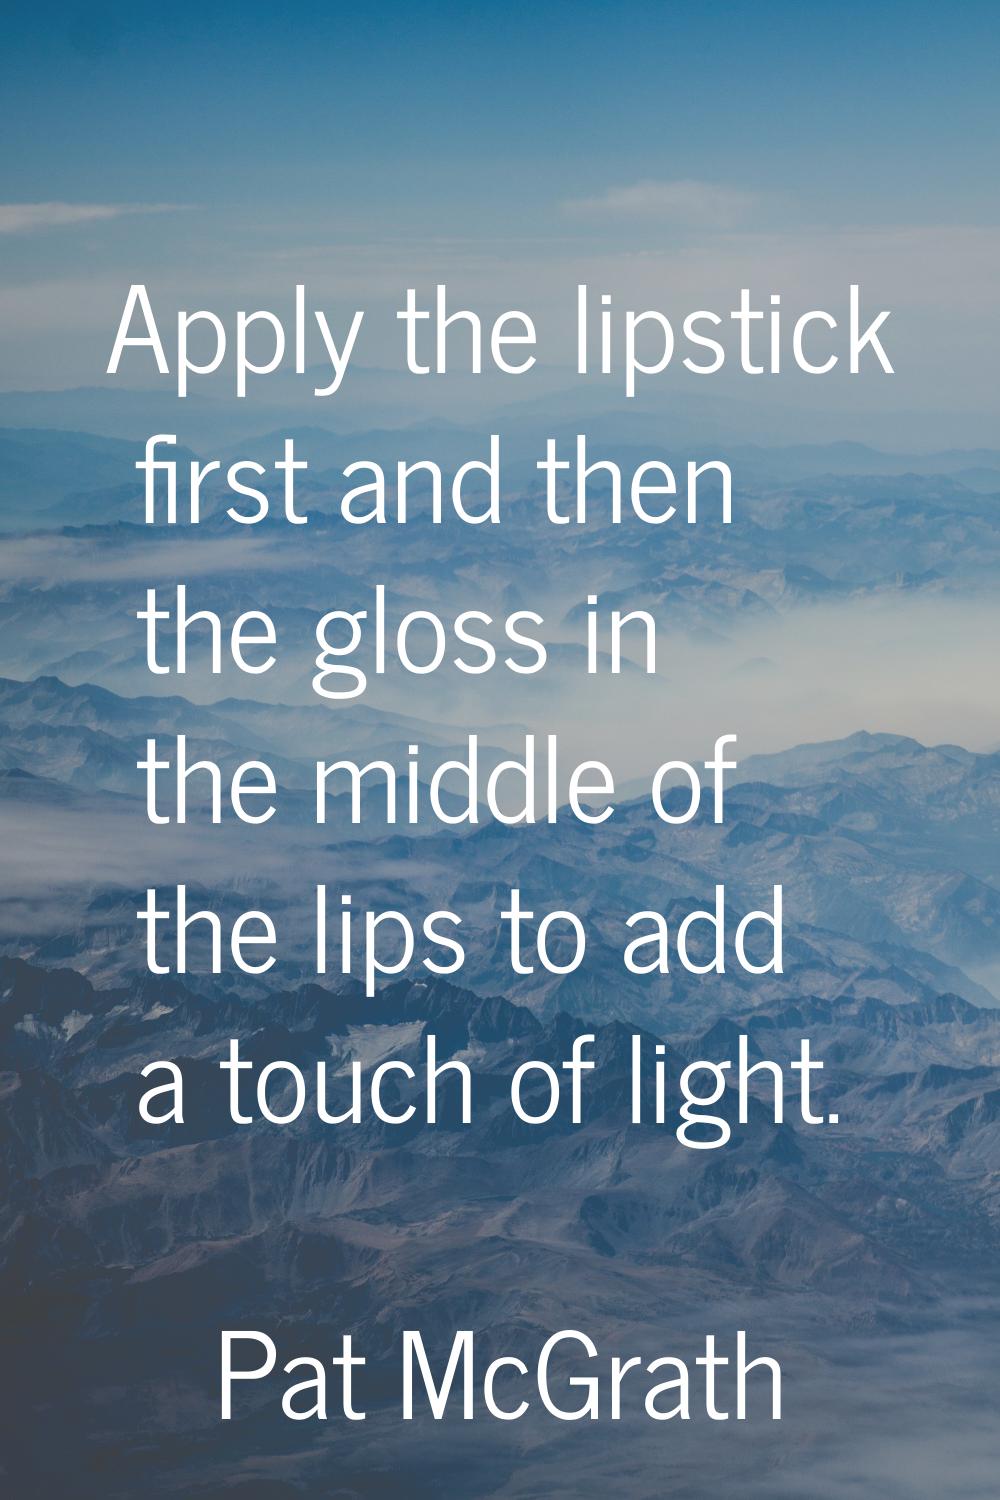 Apply the lipstick first and then the gloss in the middle of the lips to add a touch of light.